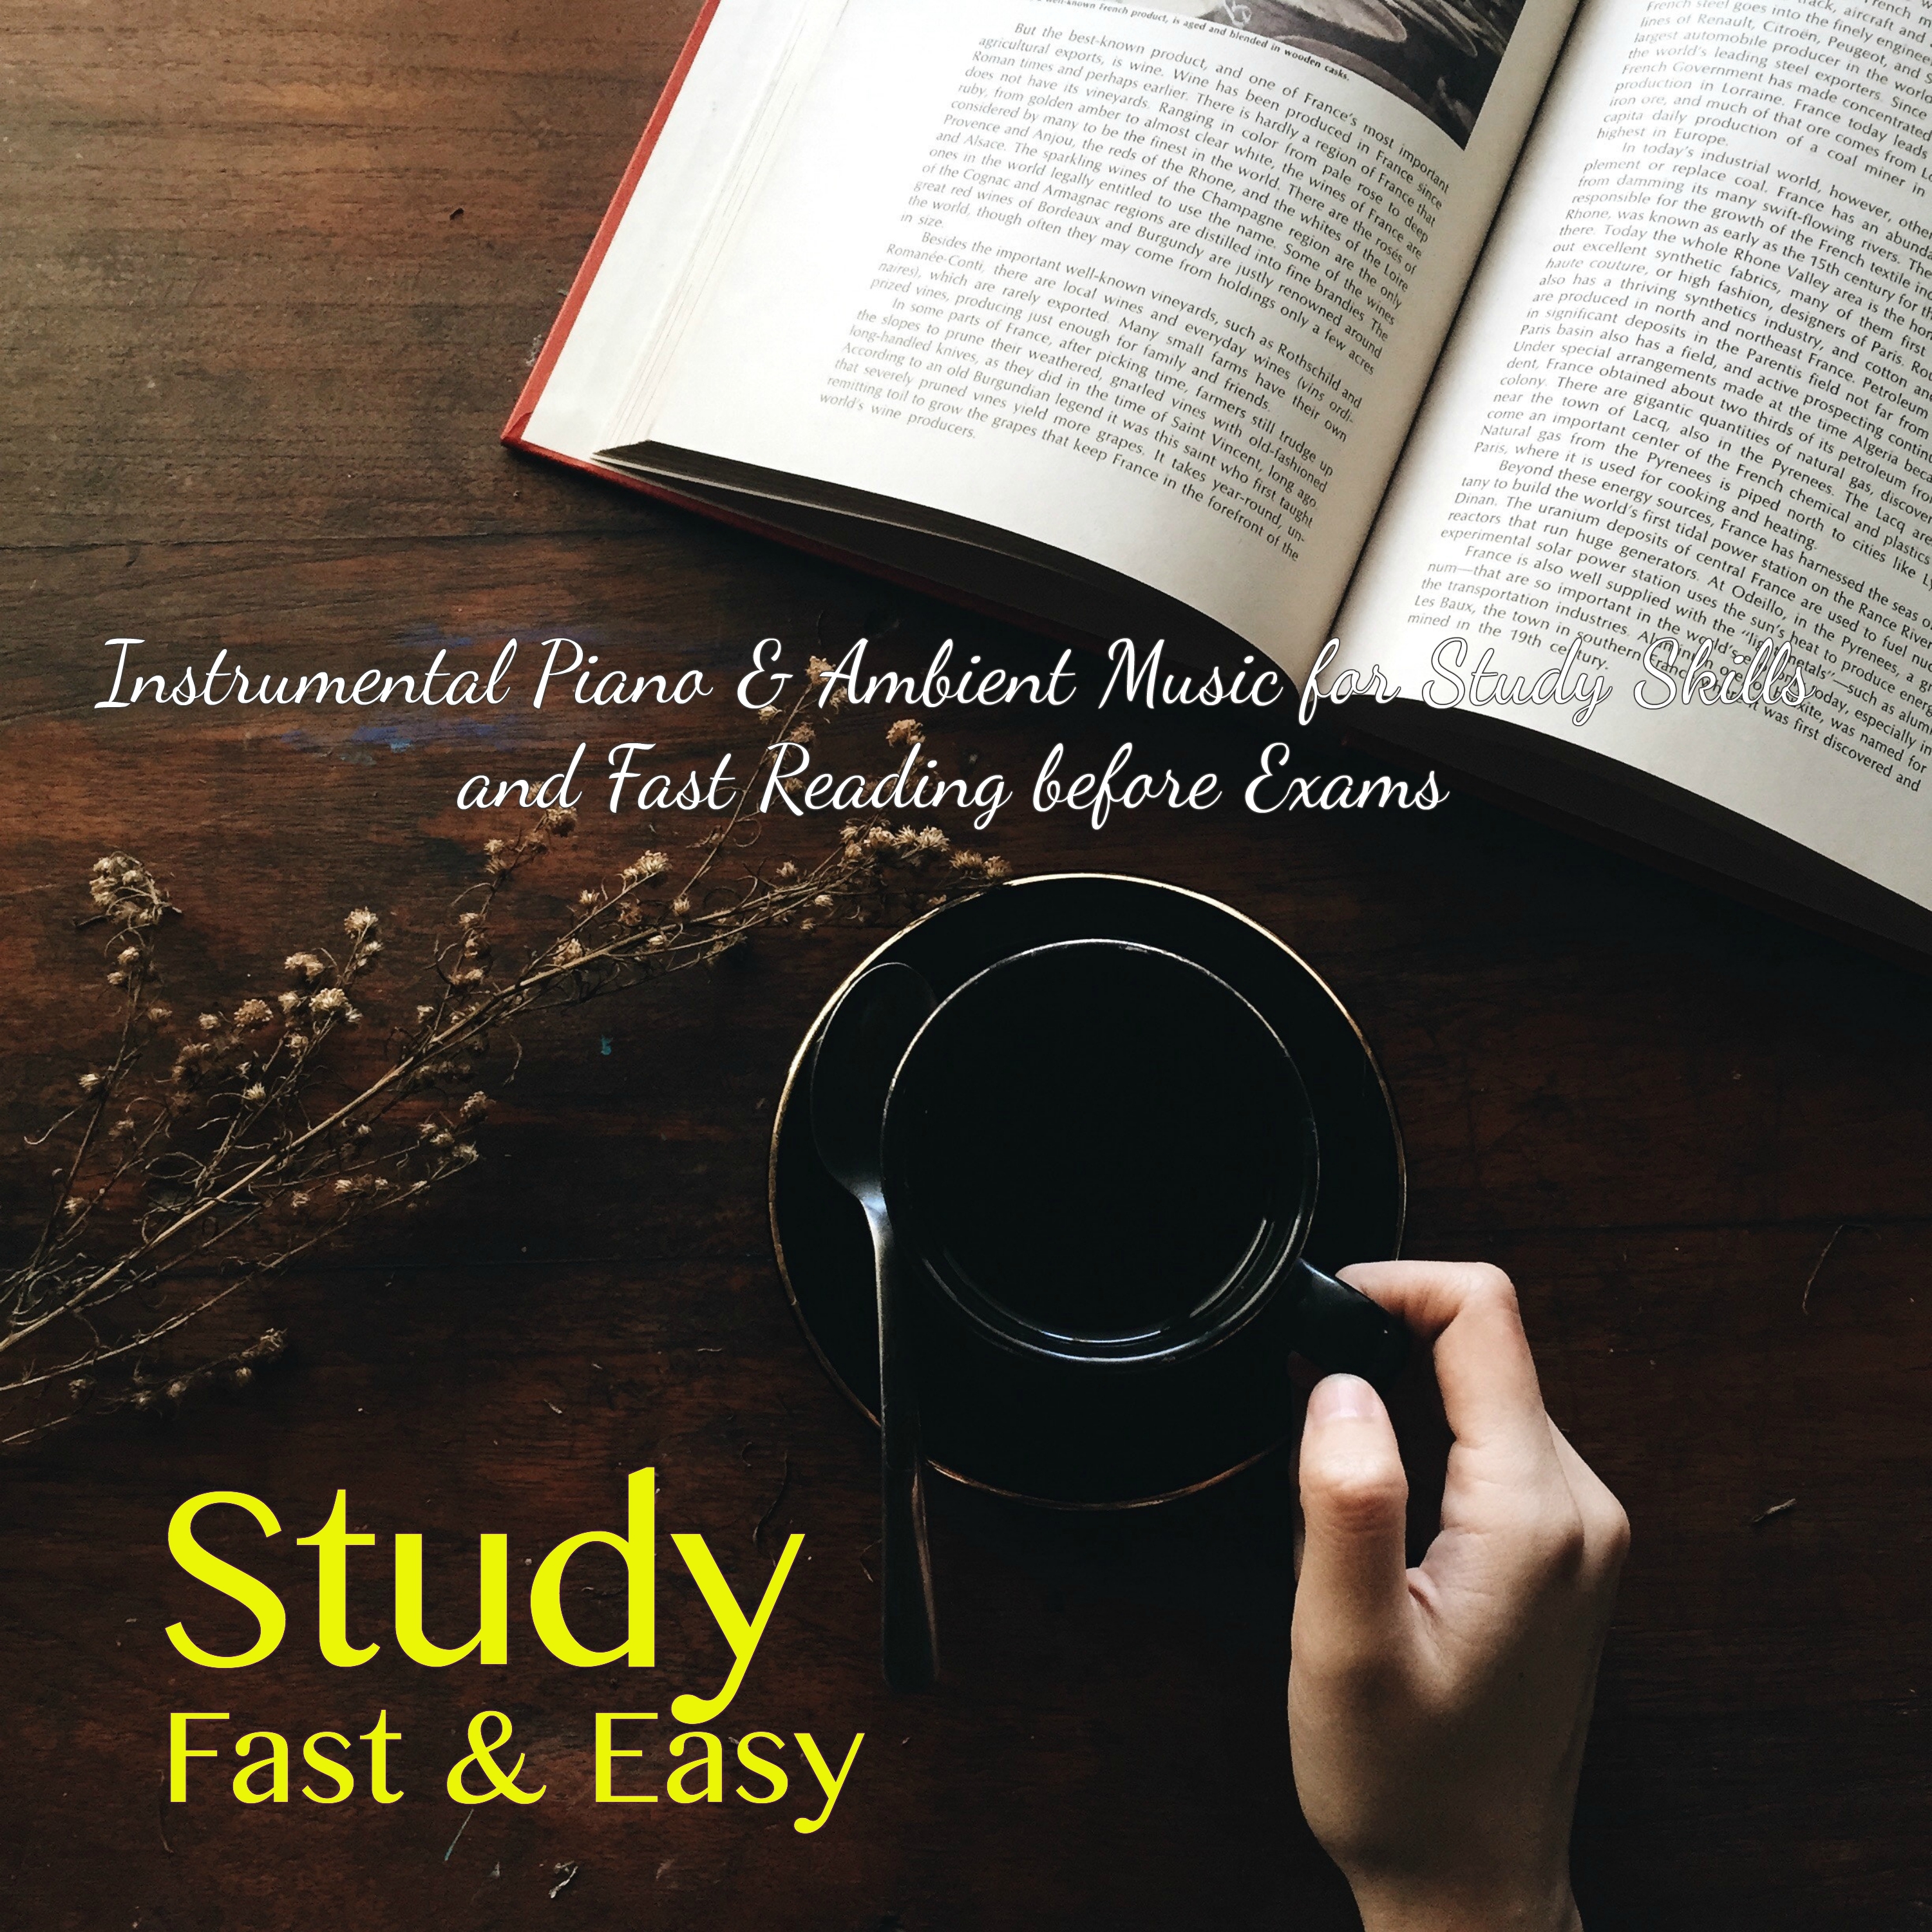 Study Fast & Easy – Instrumental Piano & Ambient Music for Study Skills and Fast Reading before Exams